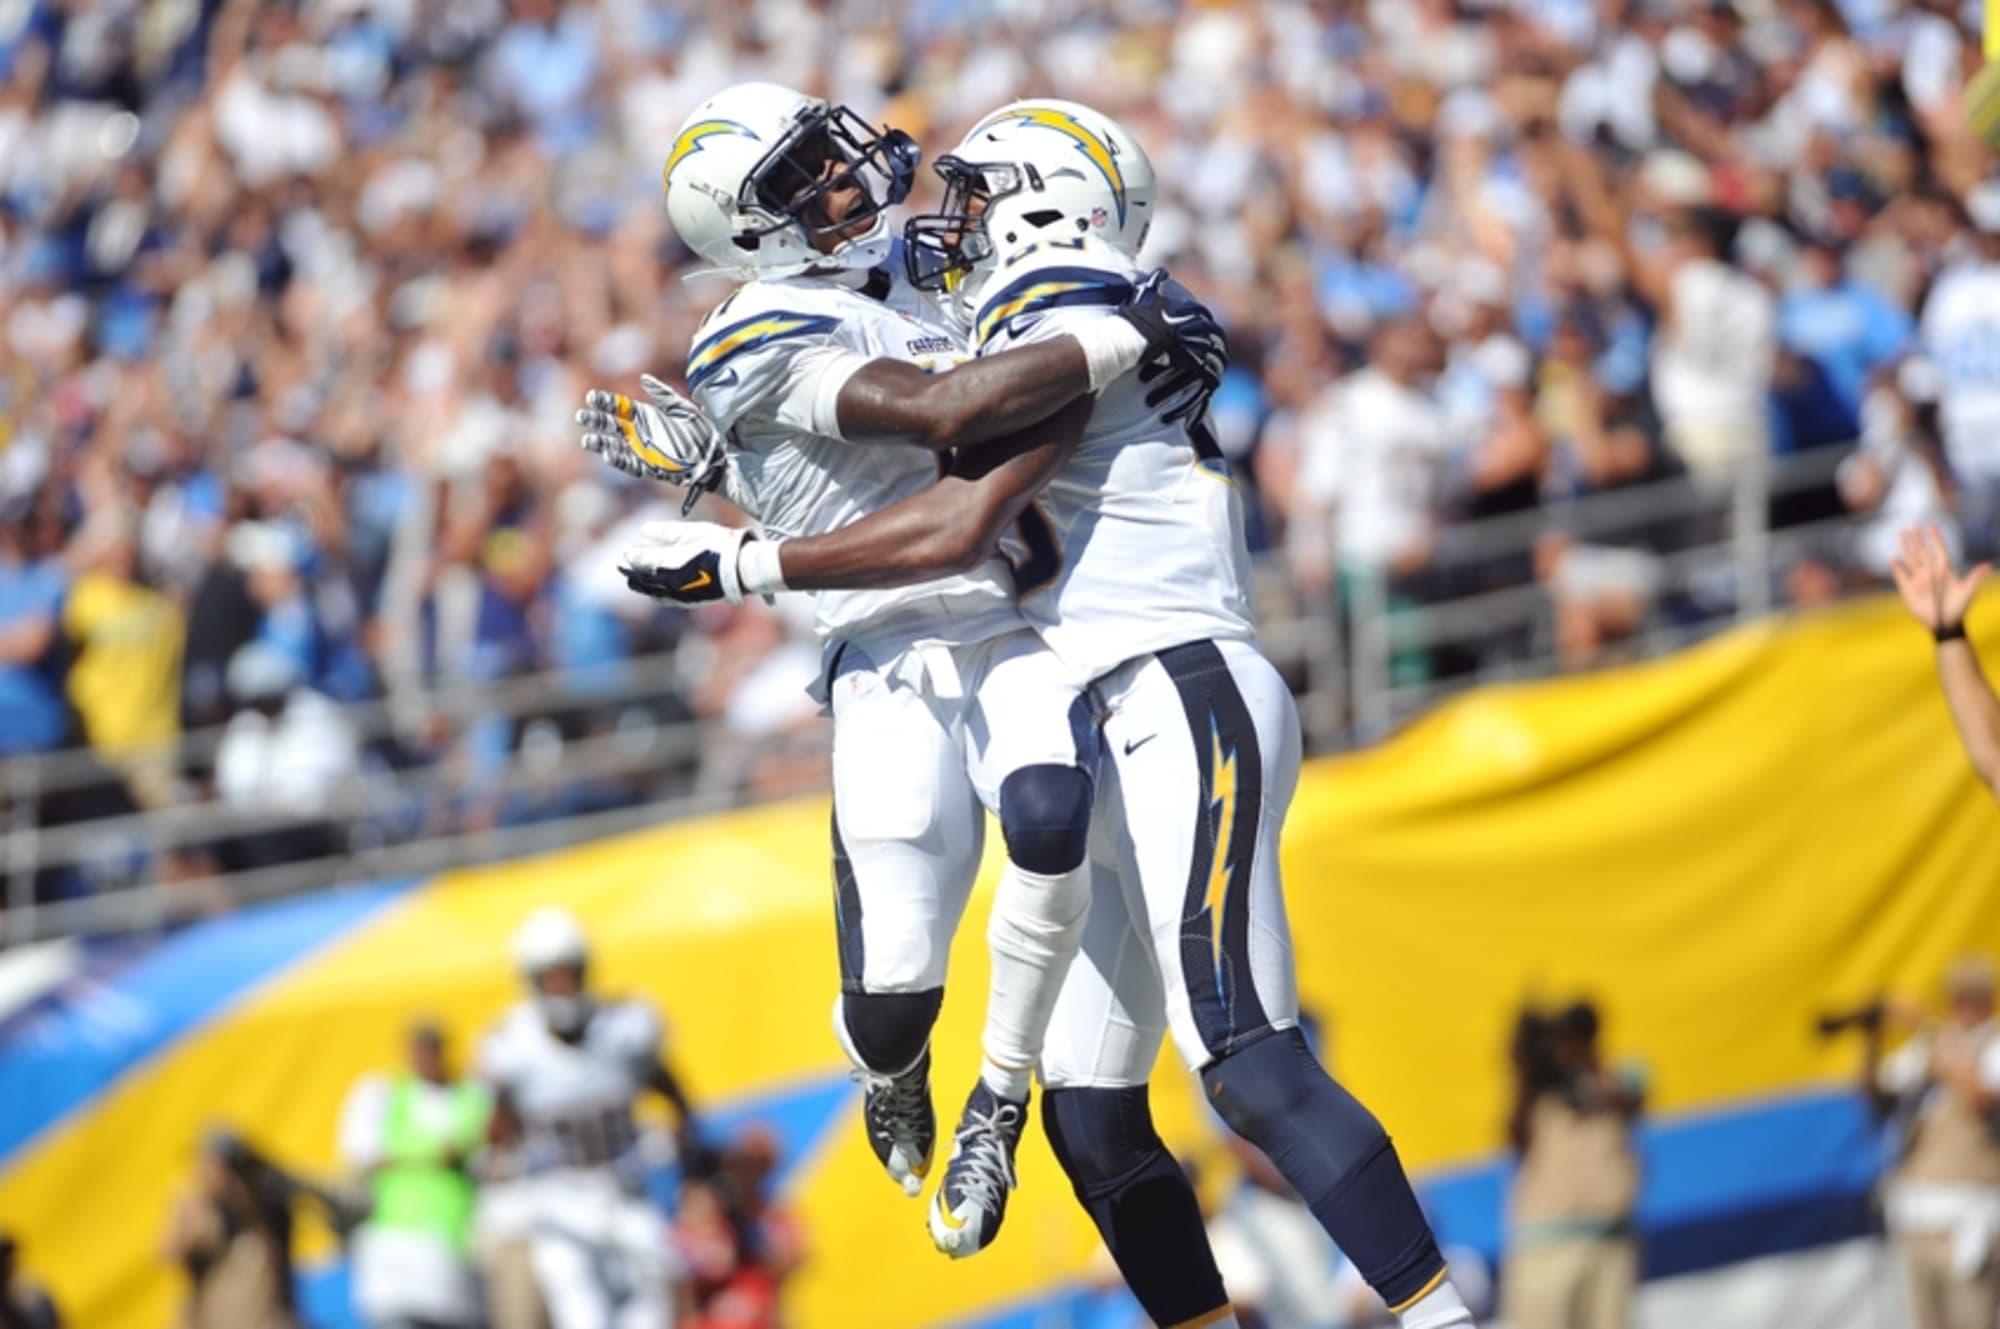 Detroit Lions vs. San Diego Chargers Full highlights, final score and more